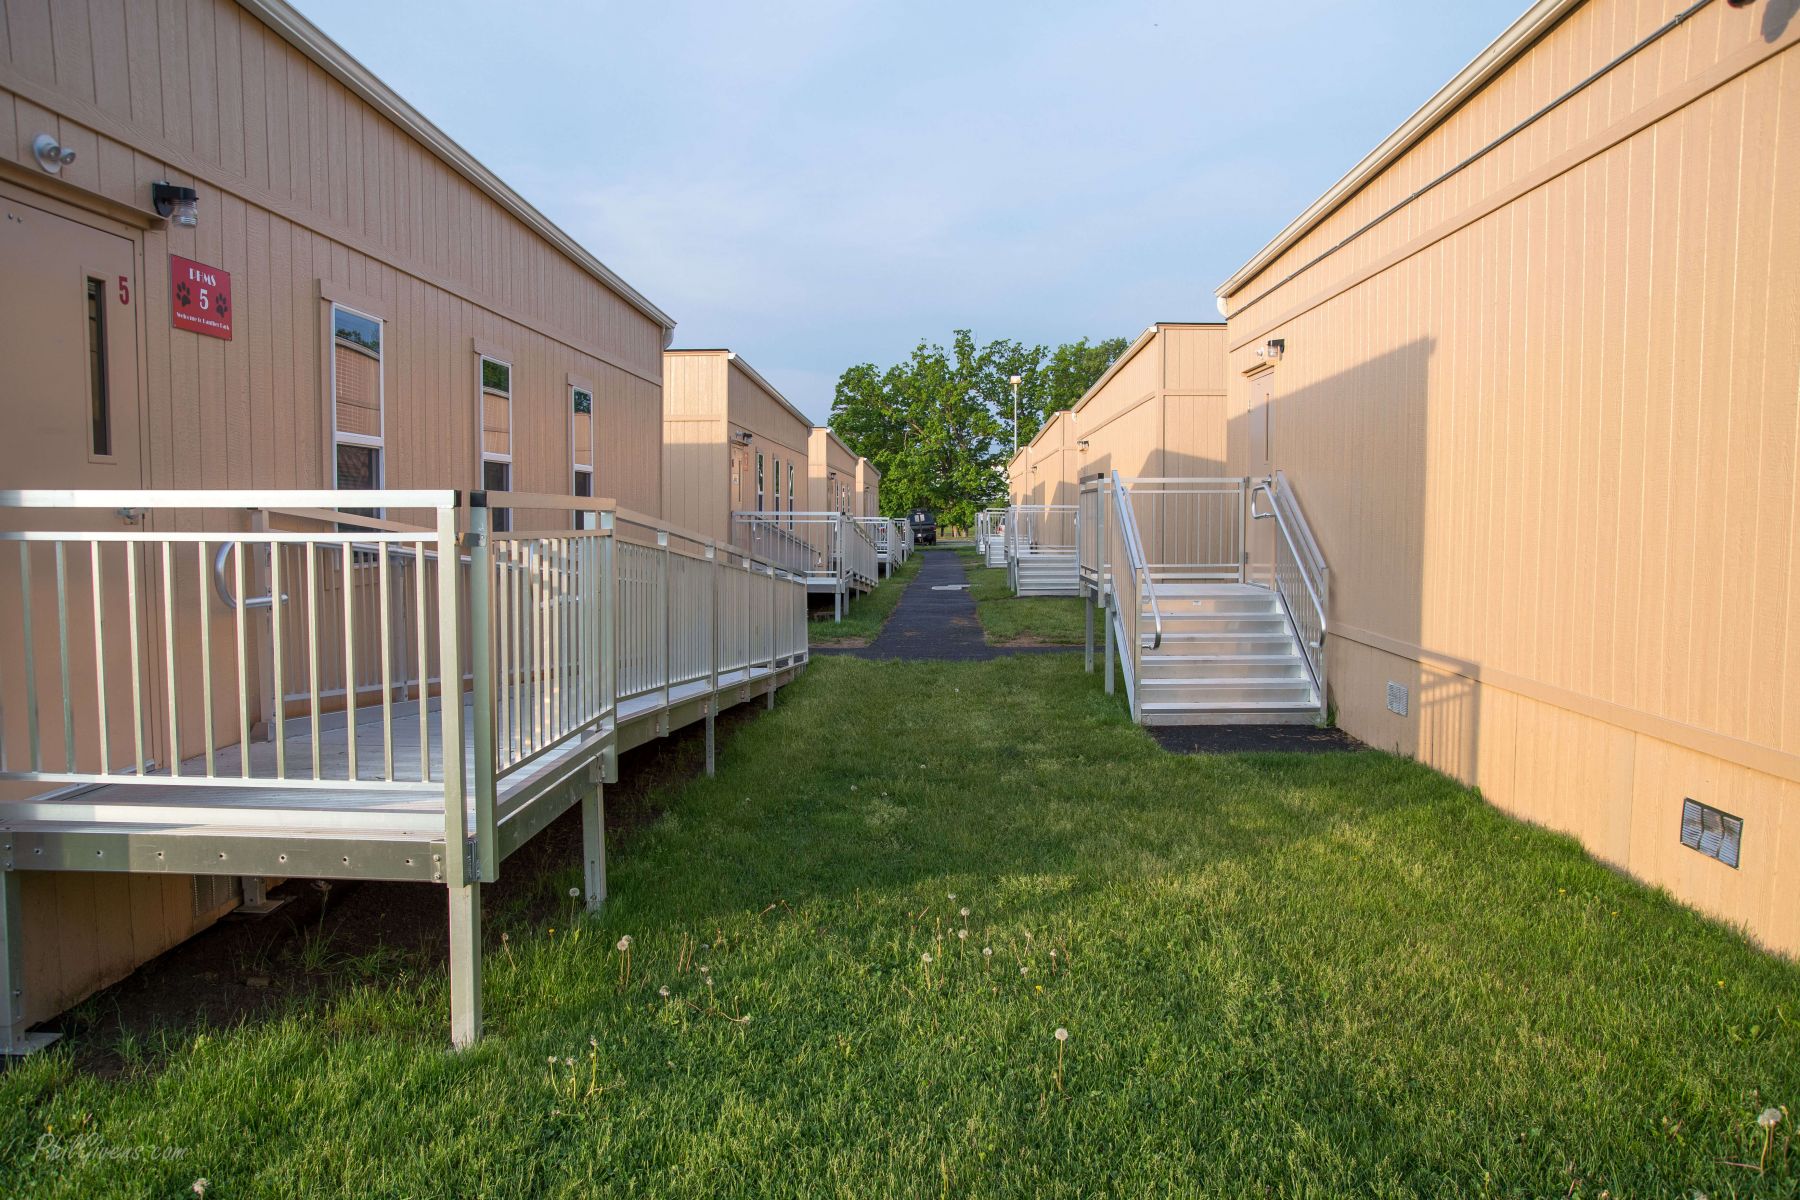 BCPS-3-Units-Perry-Hall-MS-exterior-5